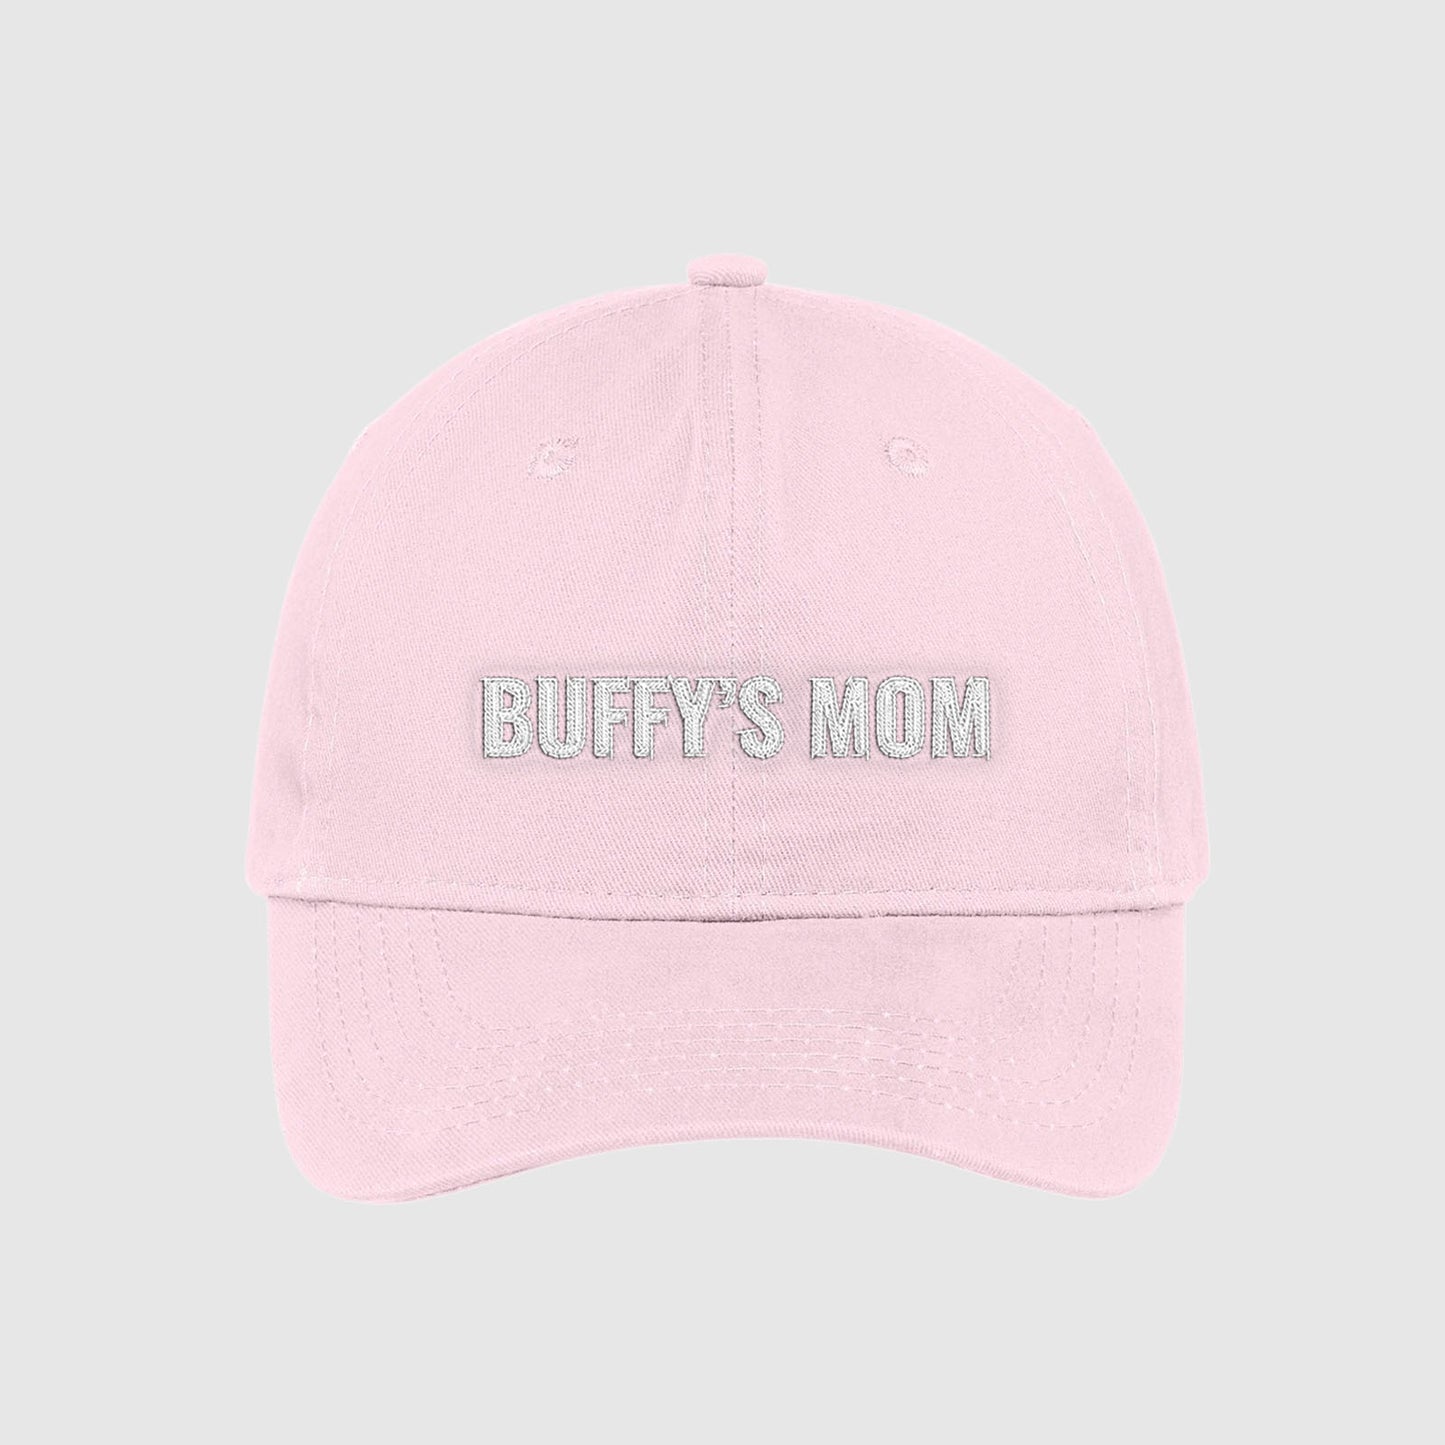 Blush light pink customizable dog mom hat with your dog's name embroidered on the front.